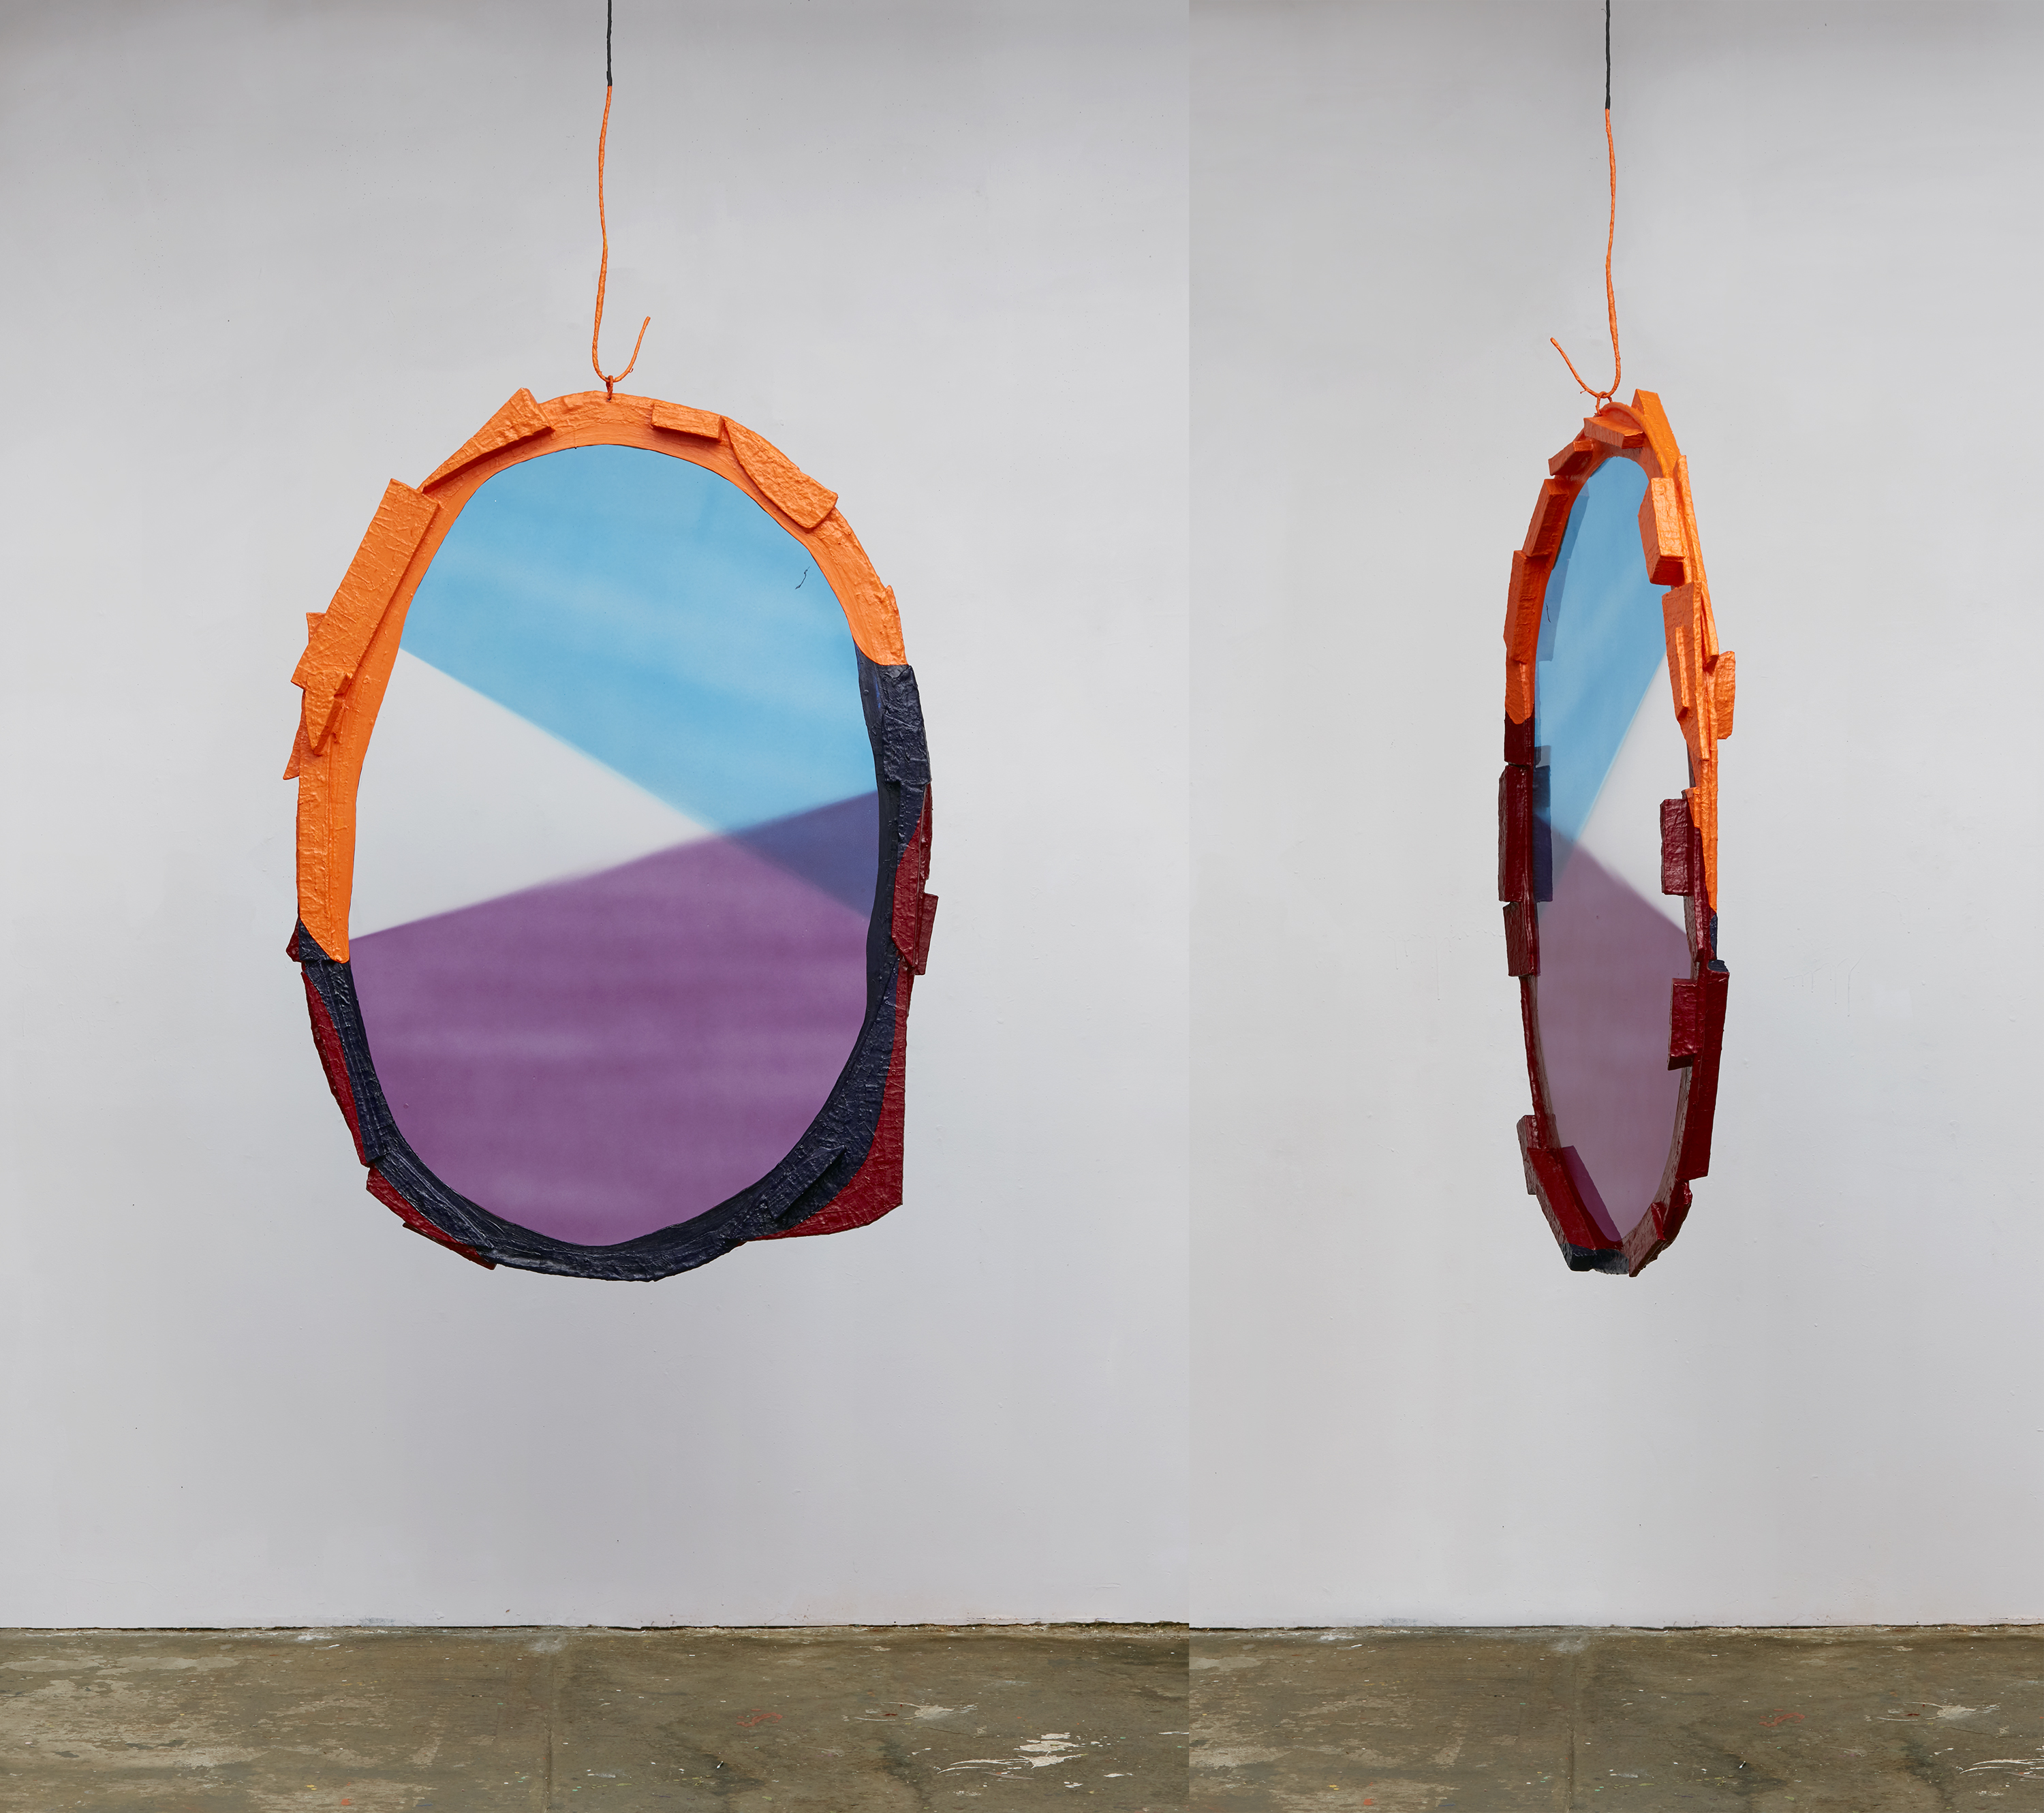 Fabienne Lasserre, Oh.Ah., 2021. Linen, steel, transparent vinyl, corrugated plastic, extruded polystyrene foam, acrylic polymer, acrylic and enamel paint. 61 x 45 x 4.5 in. Photo courtesy of Alan Wiener, Polite Photographic Services.